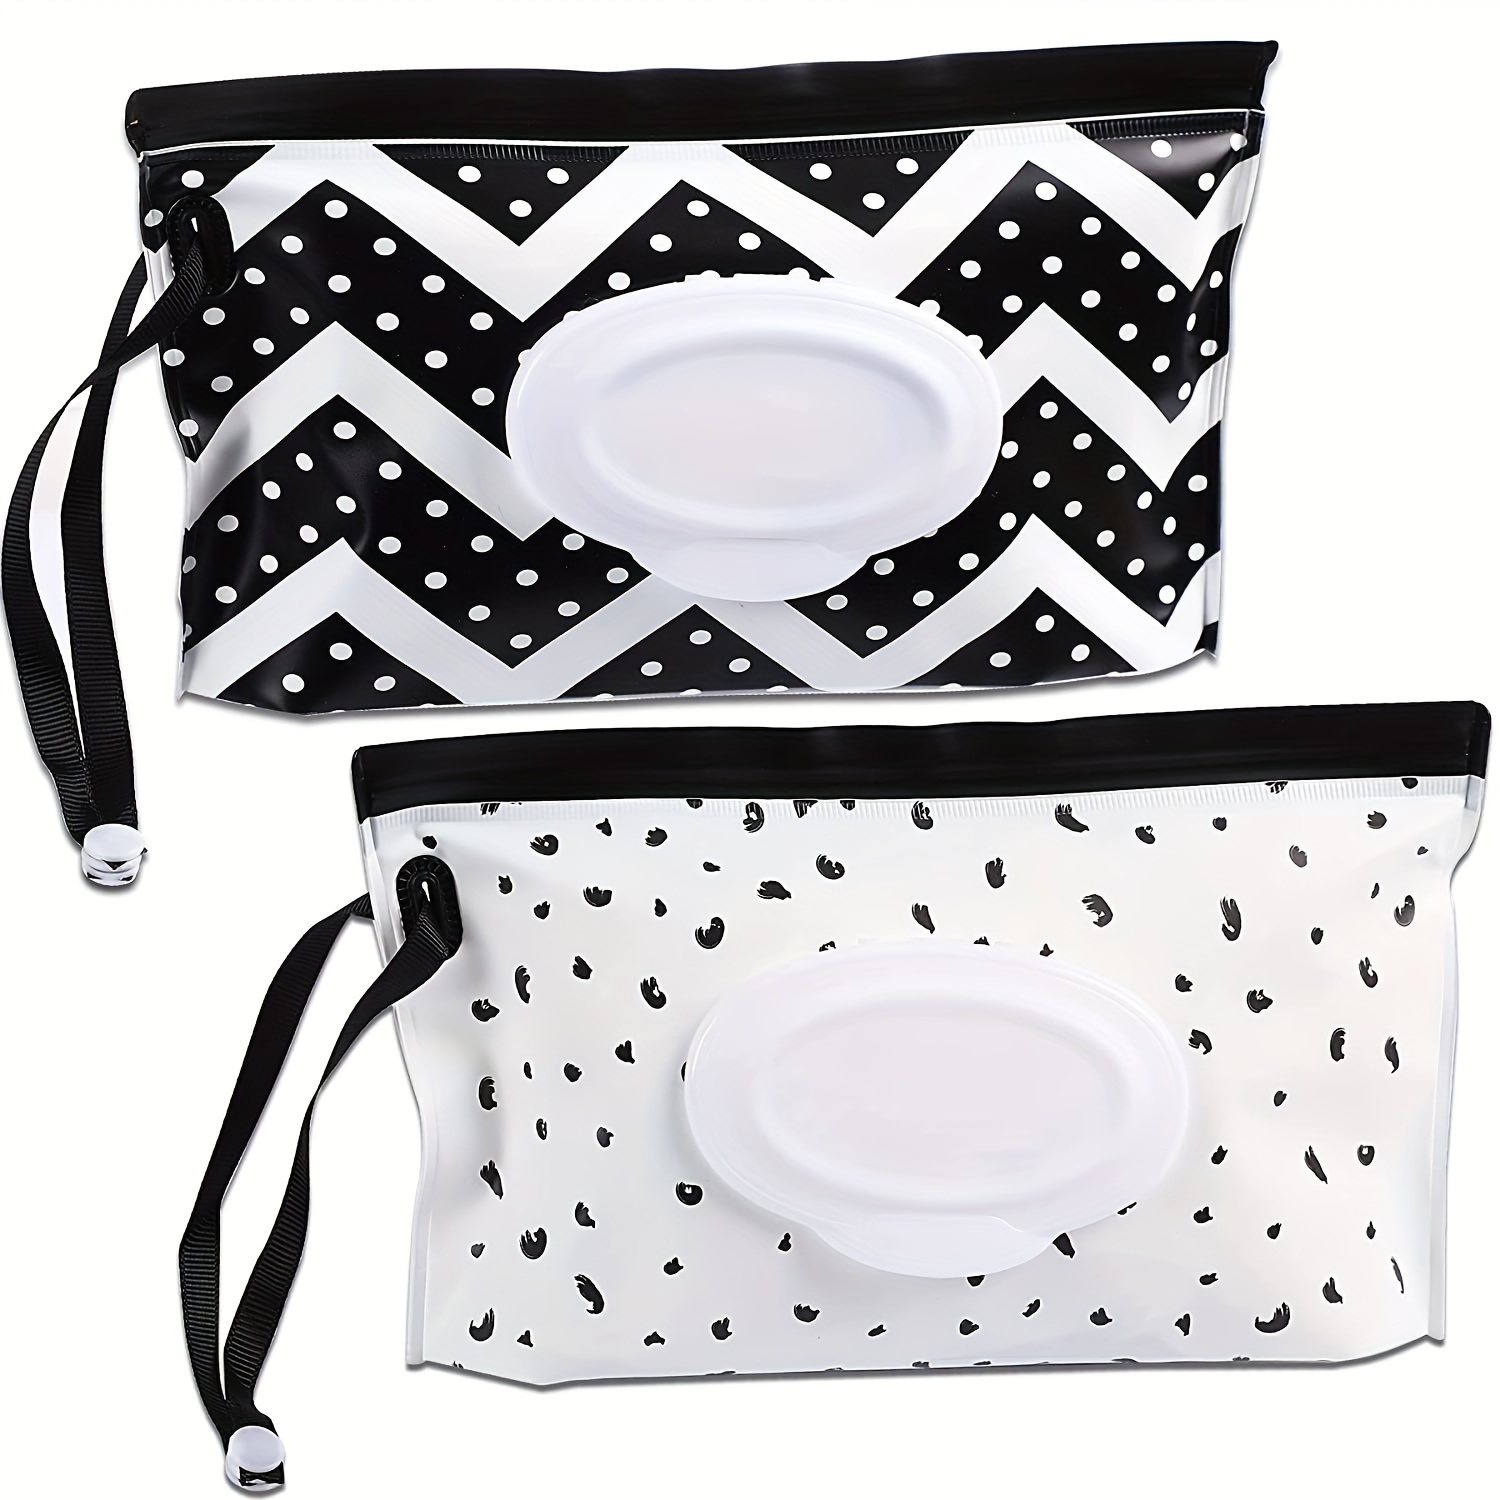 

2pcs/set Baby Wipes Container, Reusable Portable Wet Wipe Pouch, Wipe Dispenser Container, Baby Travel Wet Wipe Holder